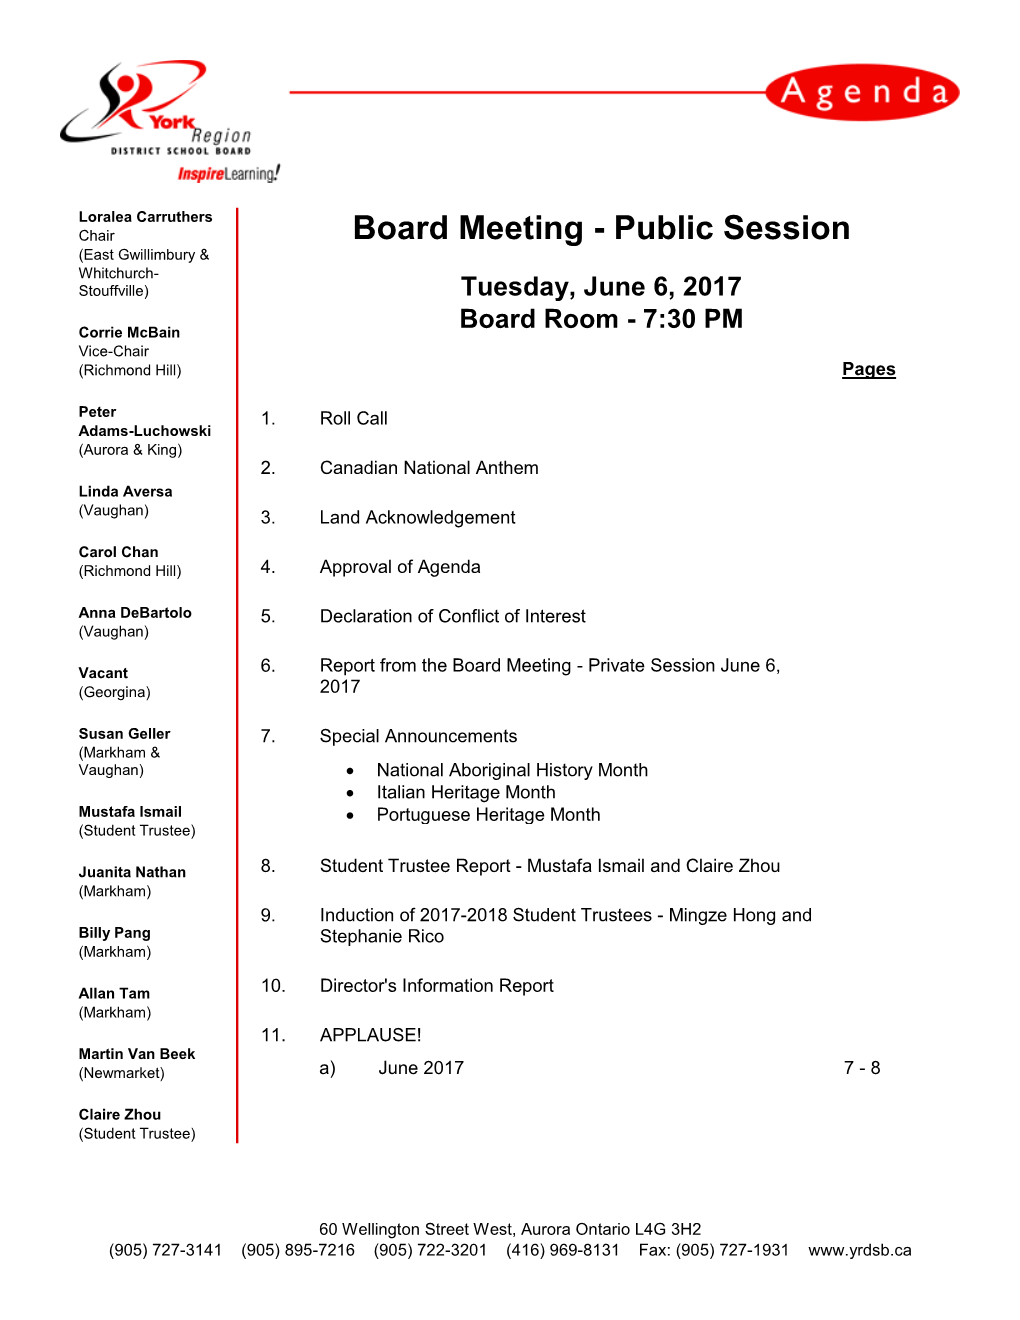 Board Meeting - Public Session (East Gwillimbury & Whitchurch- Stouffville) Tuesday, June 6, 2017